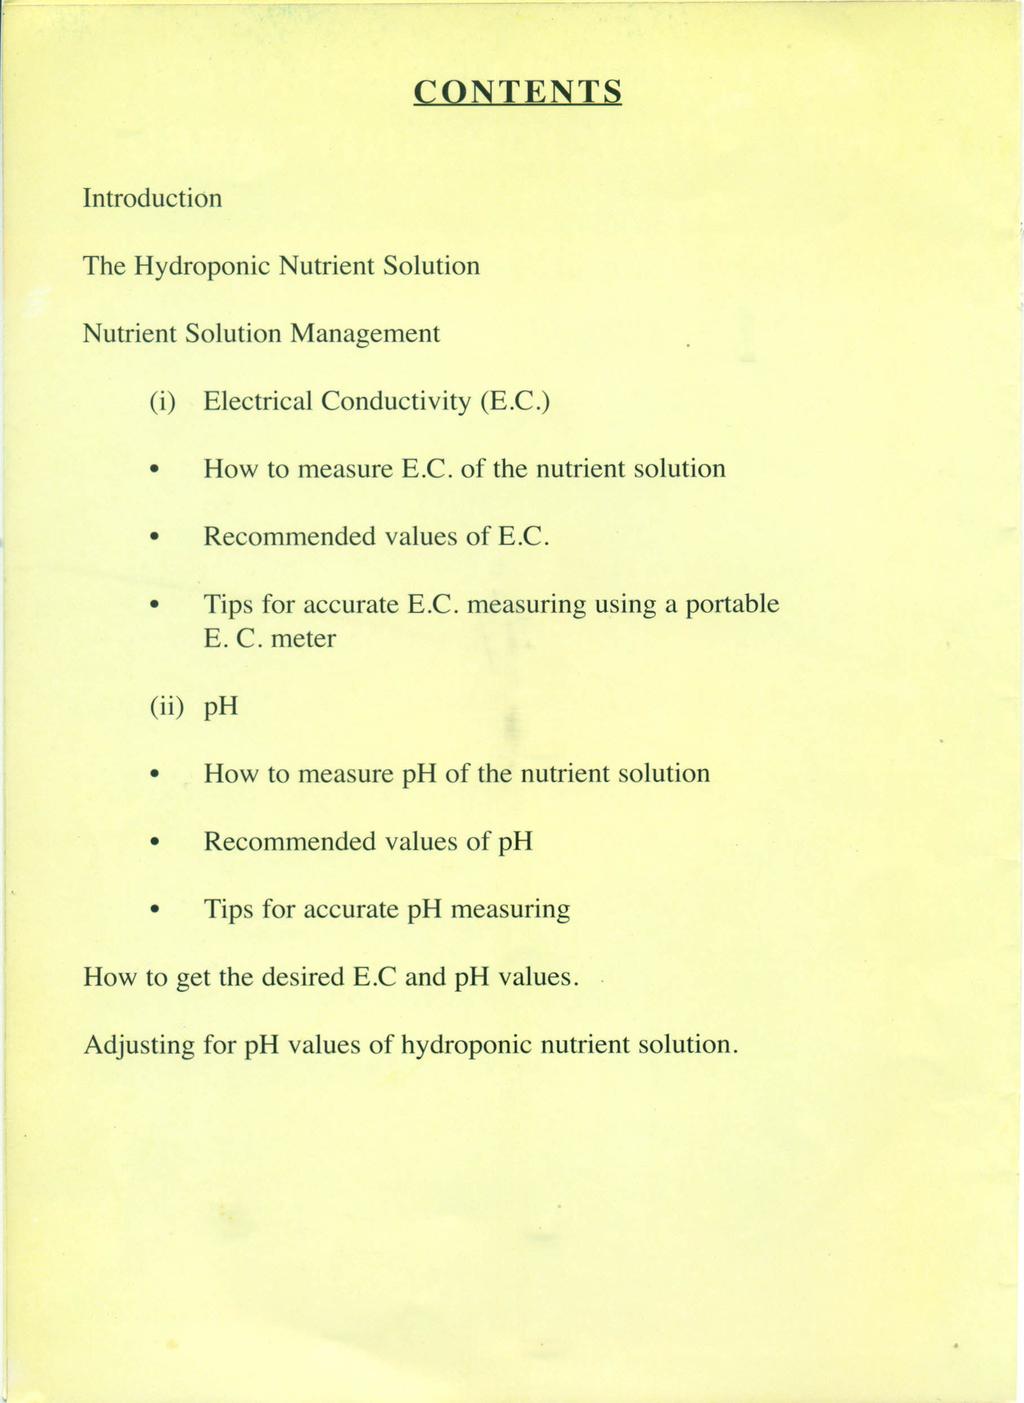 CONTENTS Introduction The Hydroponic Nutrient Solution Nutrient Solution Management (i) Electrical Conductivity (E.C.) How to measure E.C. of the nutrient solution Recommended values of E.C. Tips for accurate E.